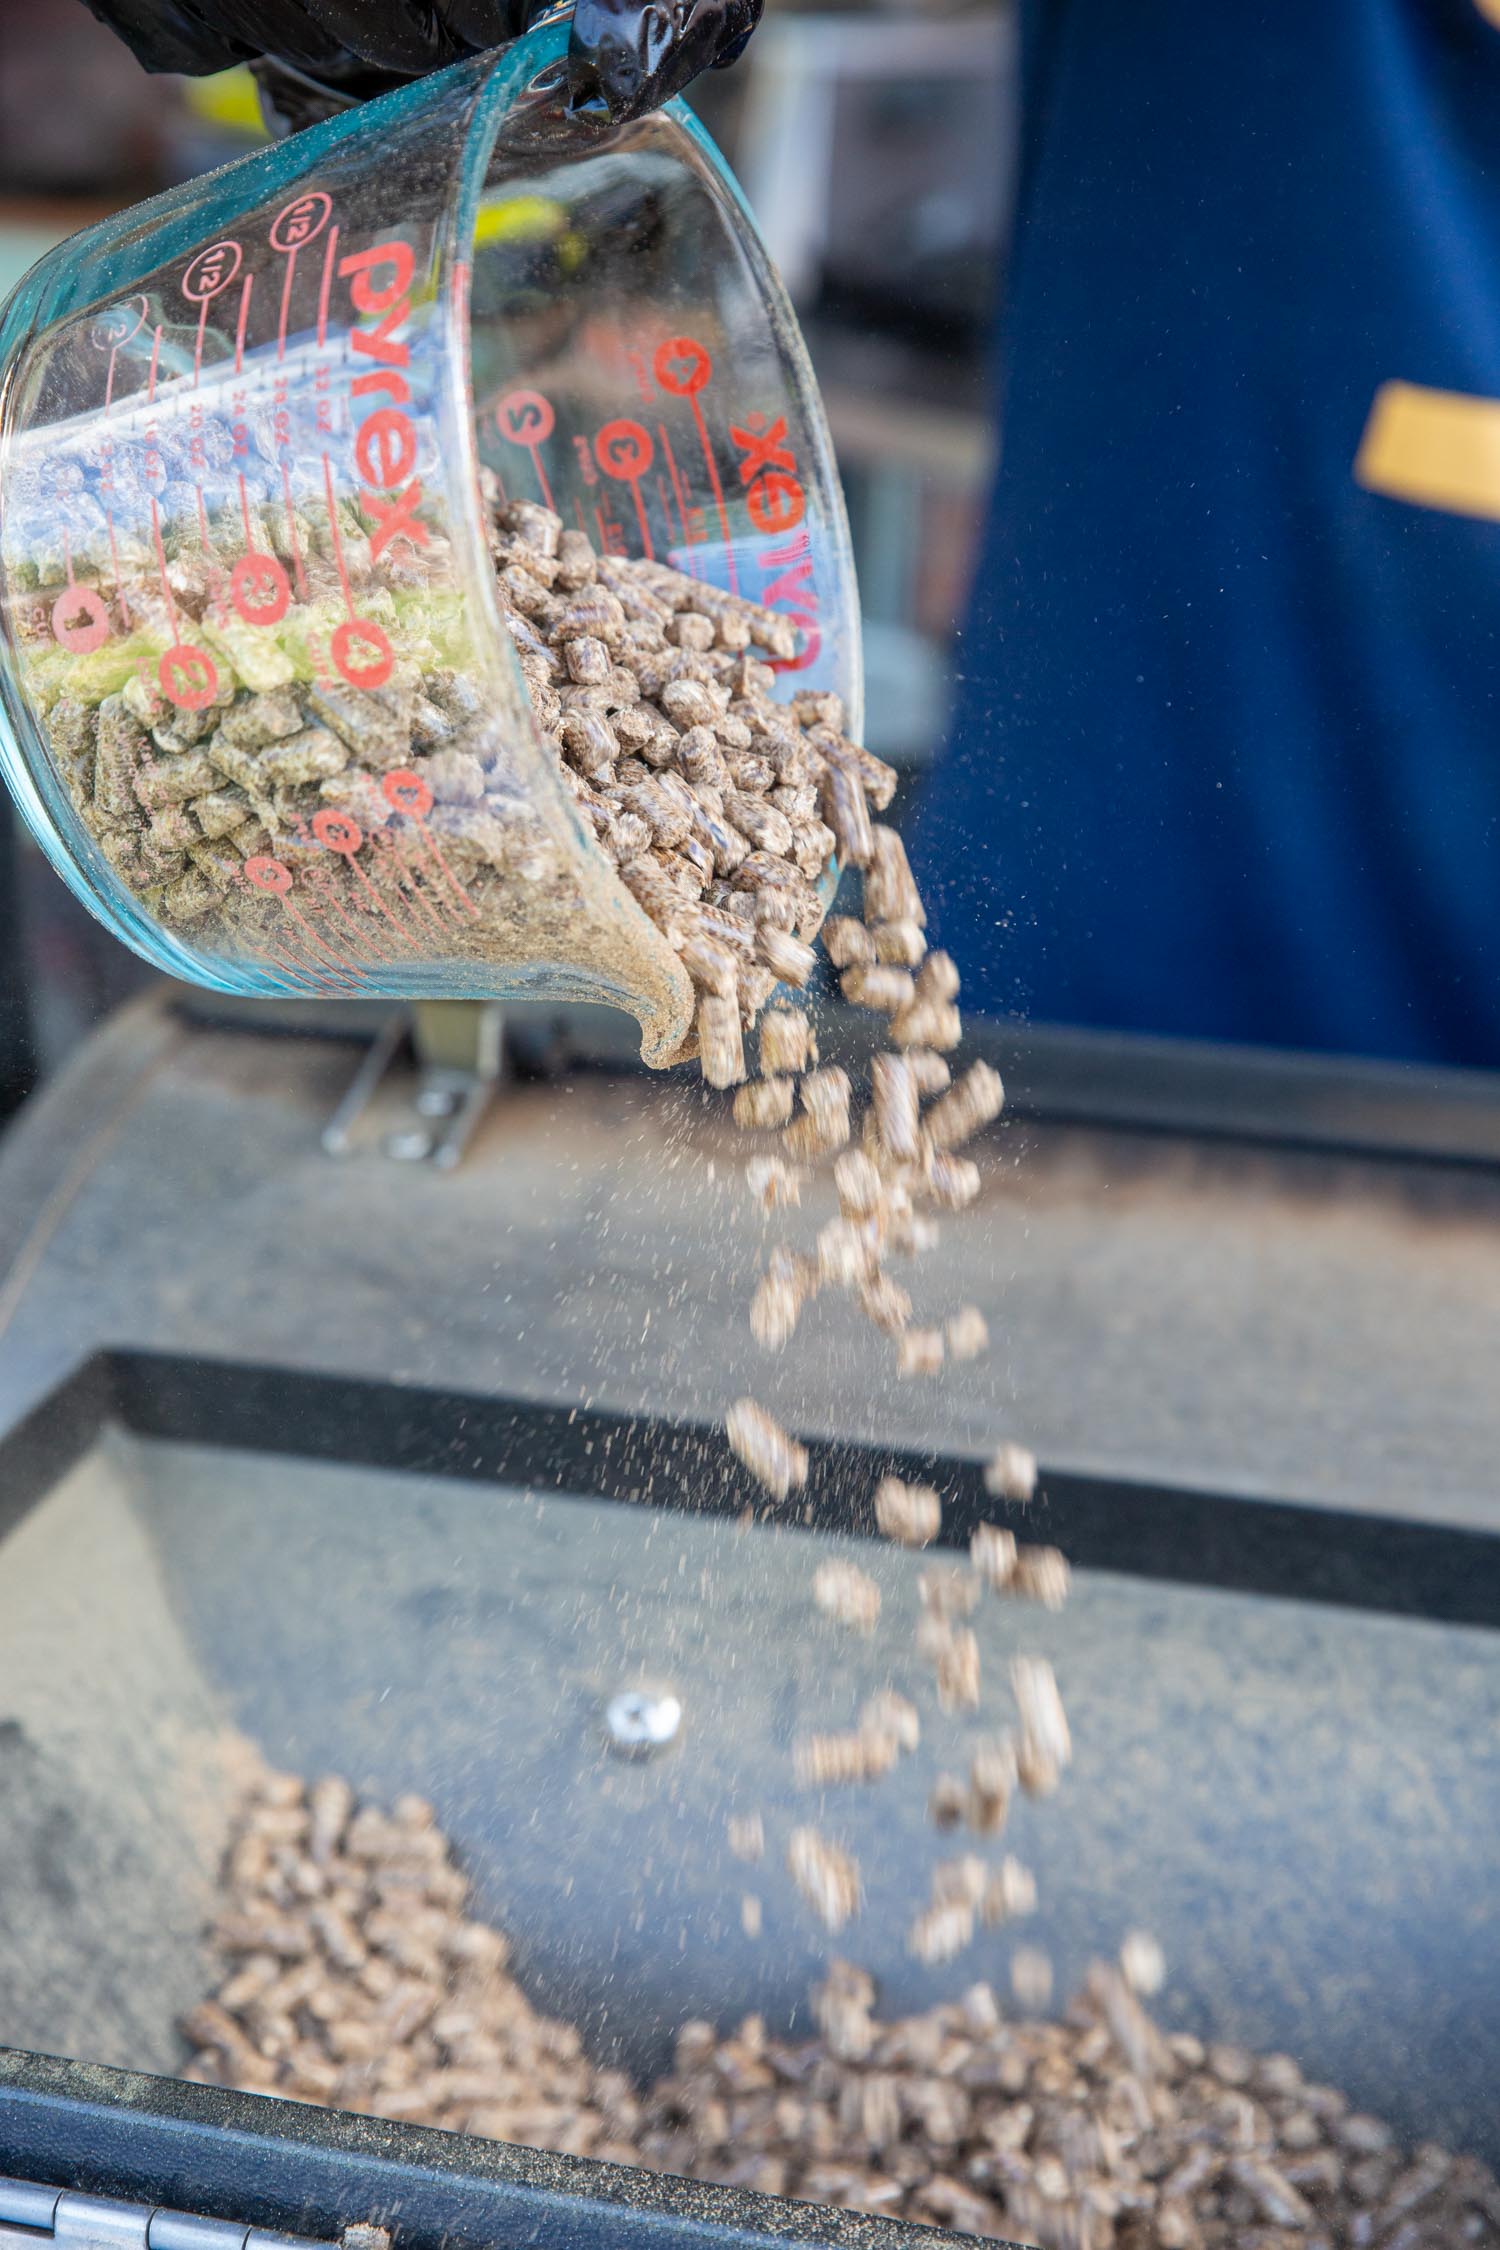 Pellets being pored into the hopped of the pellet grill.